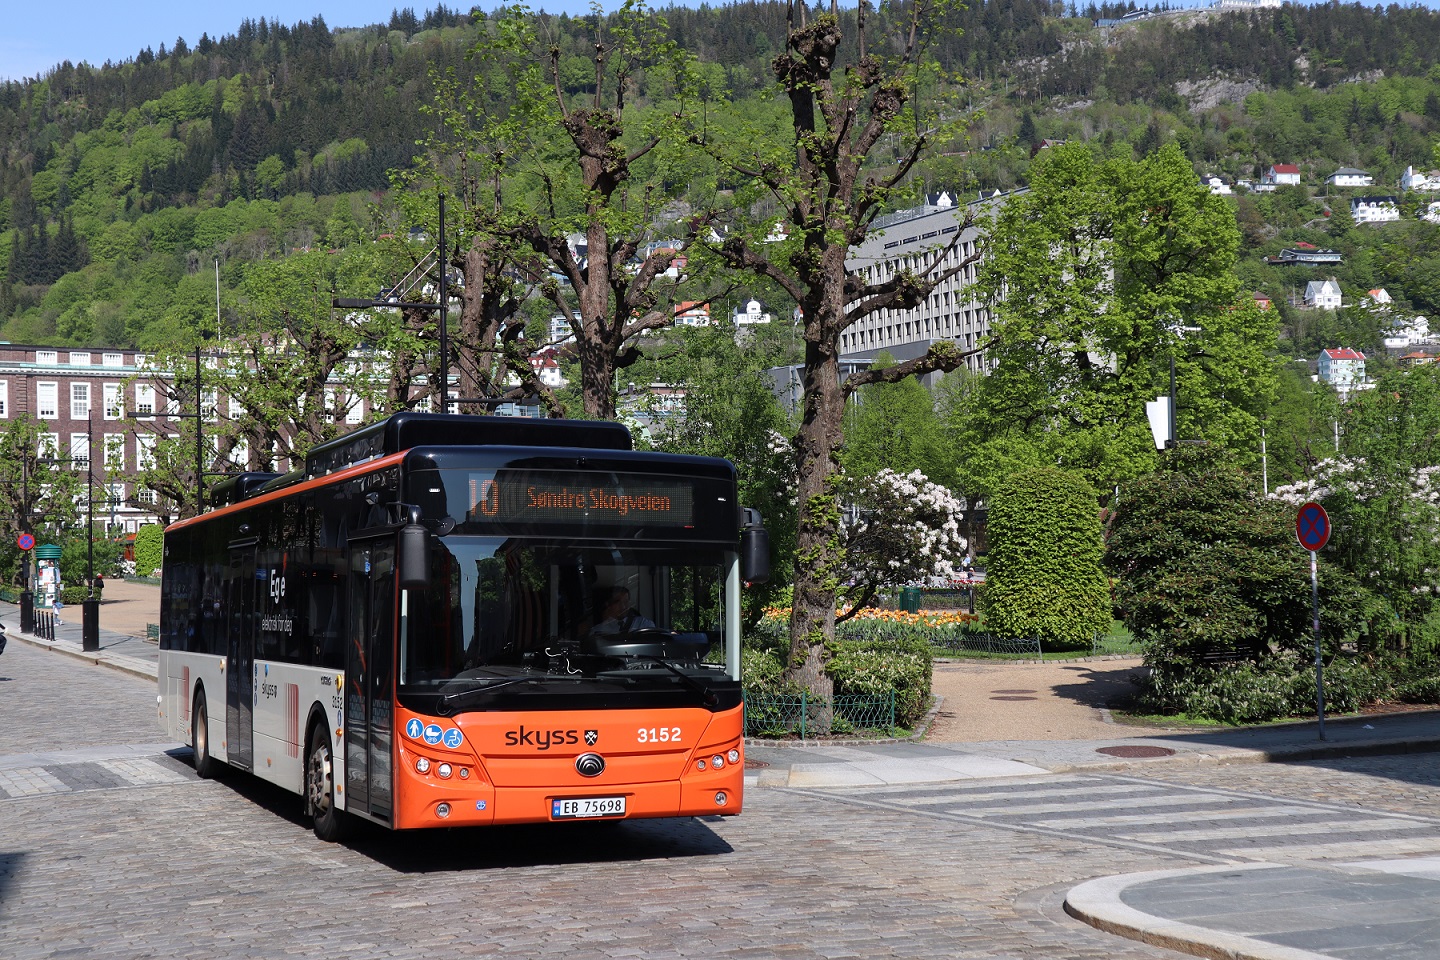 Norway in second place on deployment of zero emission buses